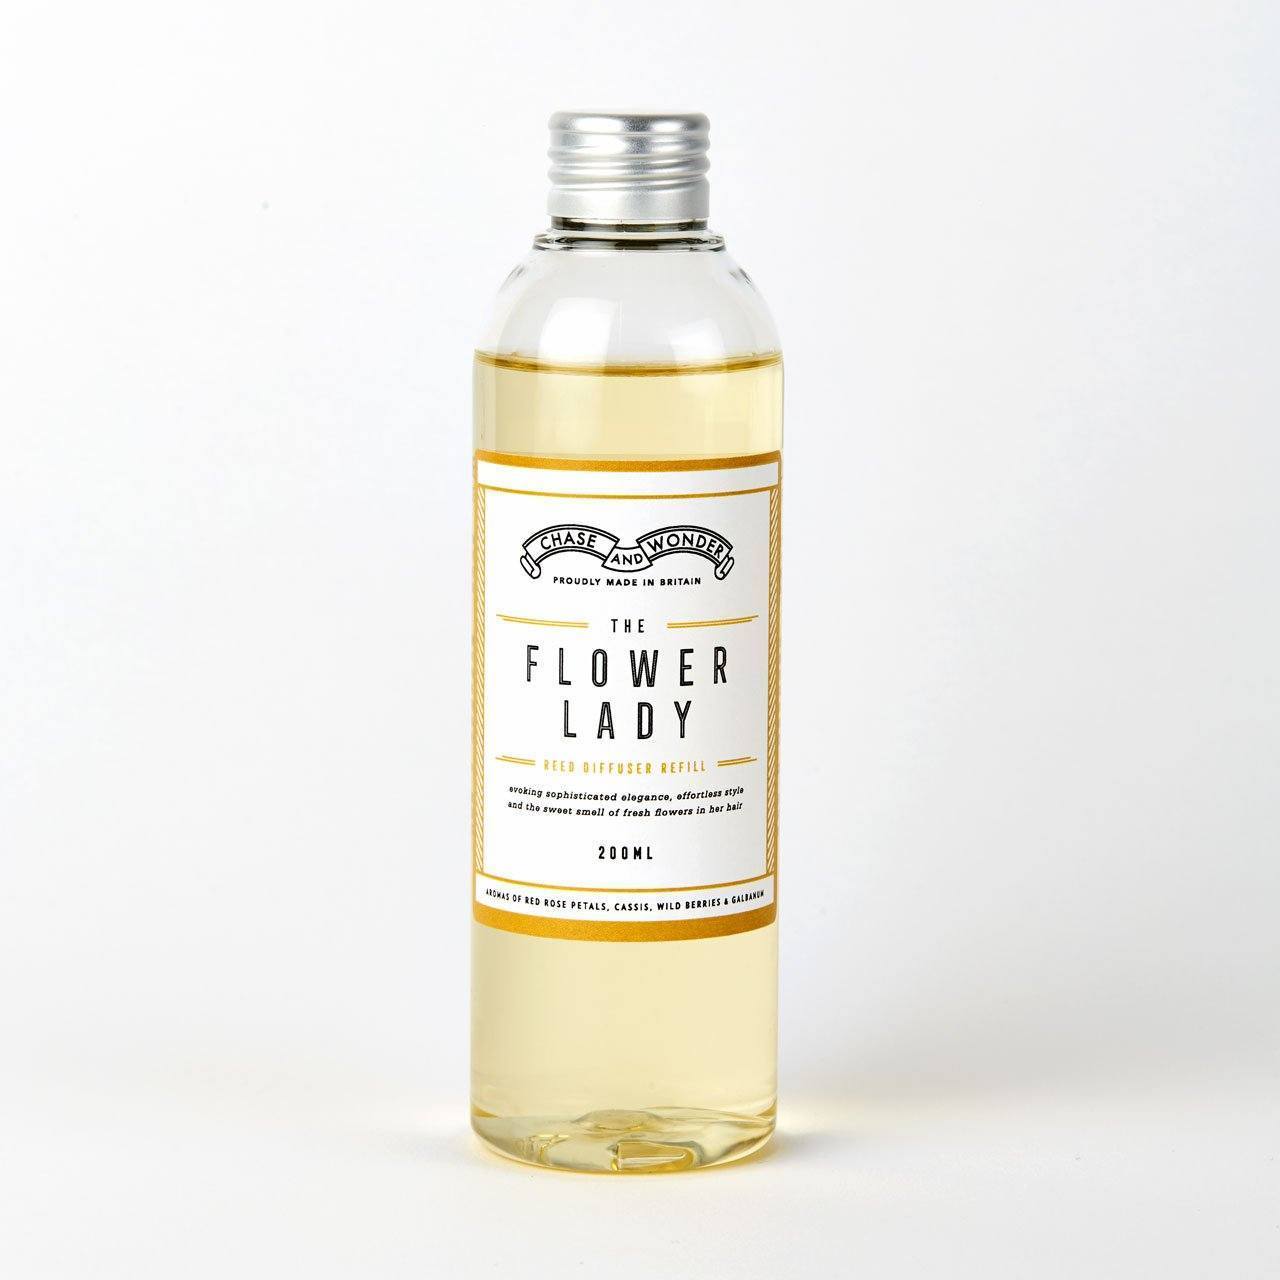 The Flower Lady Reed Diffuser Refill - Chase and Wonder - Proudly Made in Britain